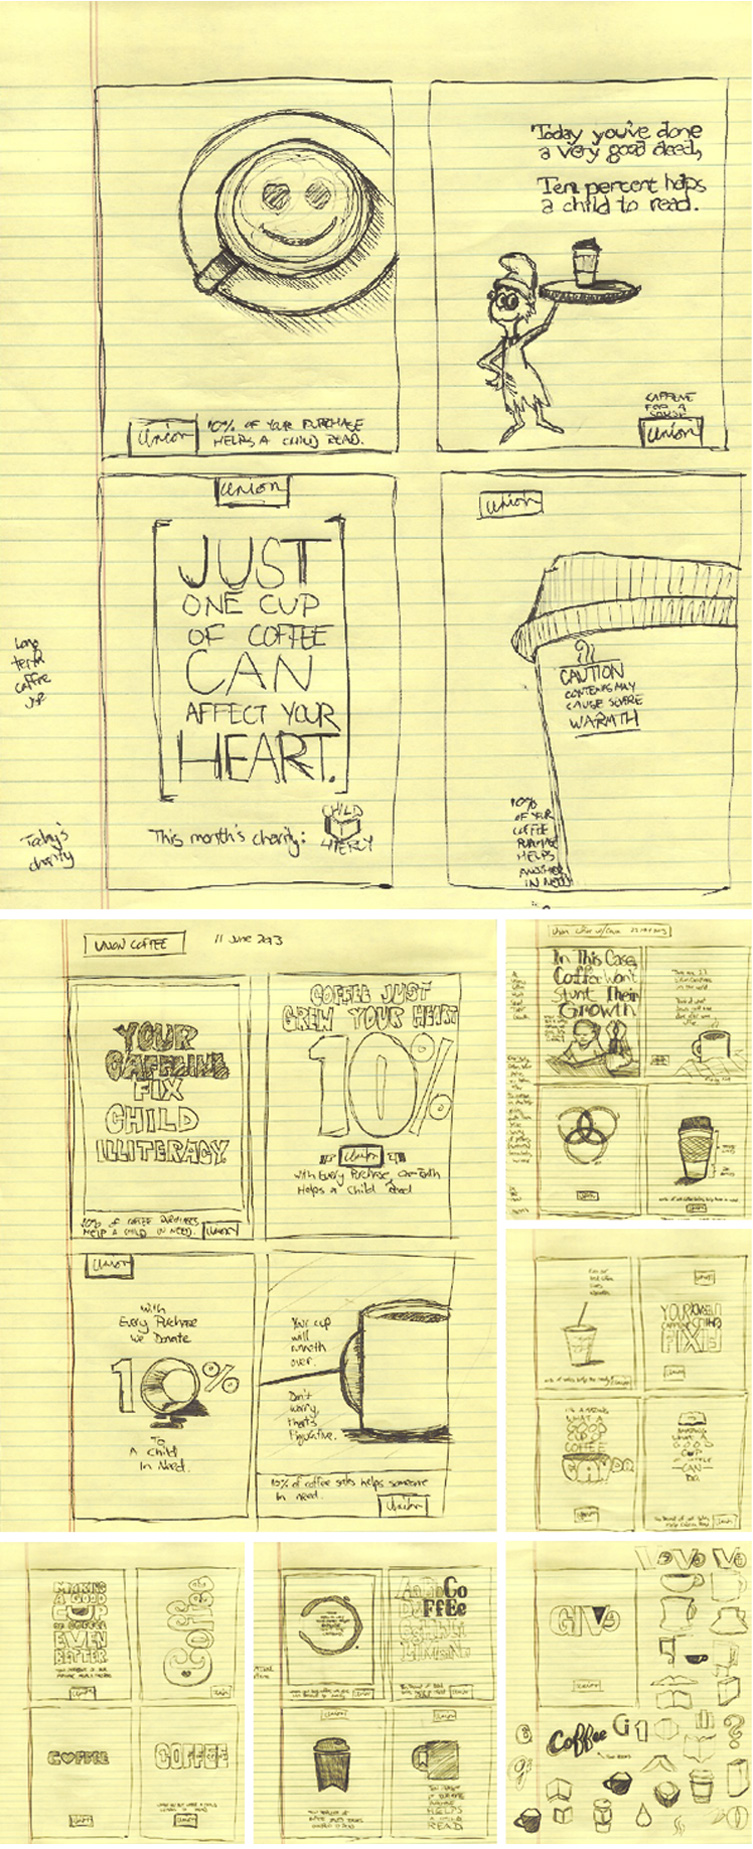 Creative Advertising Concept Sketches - by Tidal Wave Marketing, Inc.